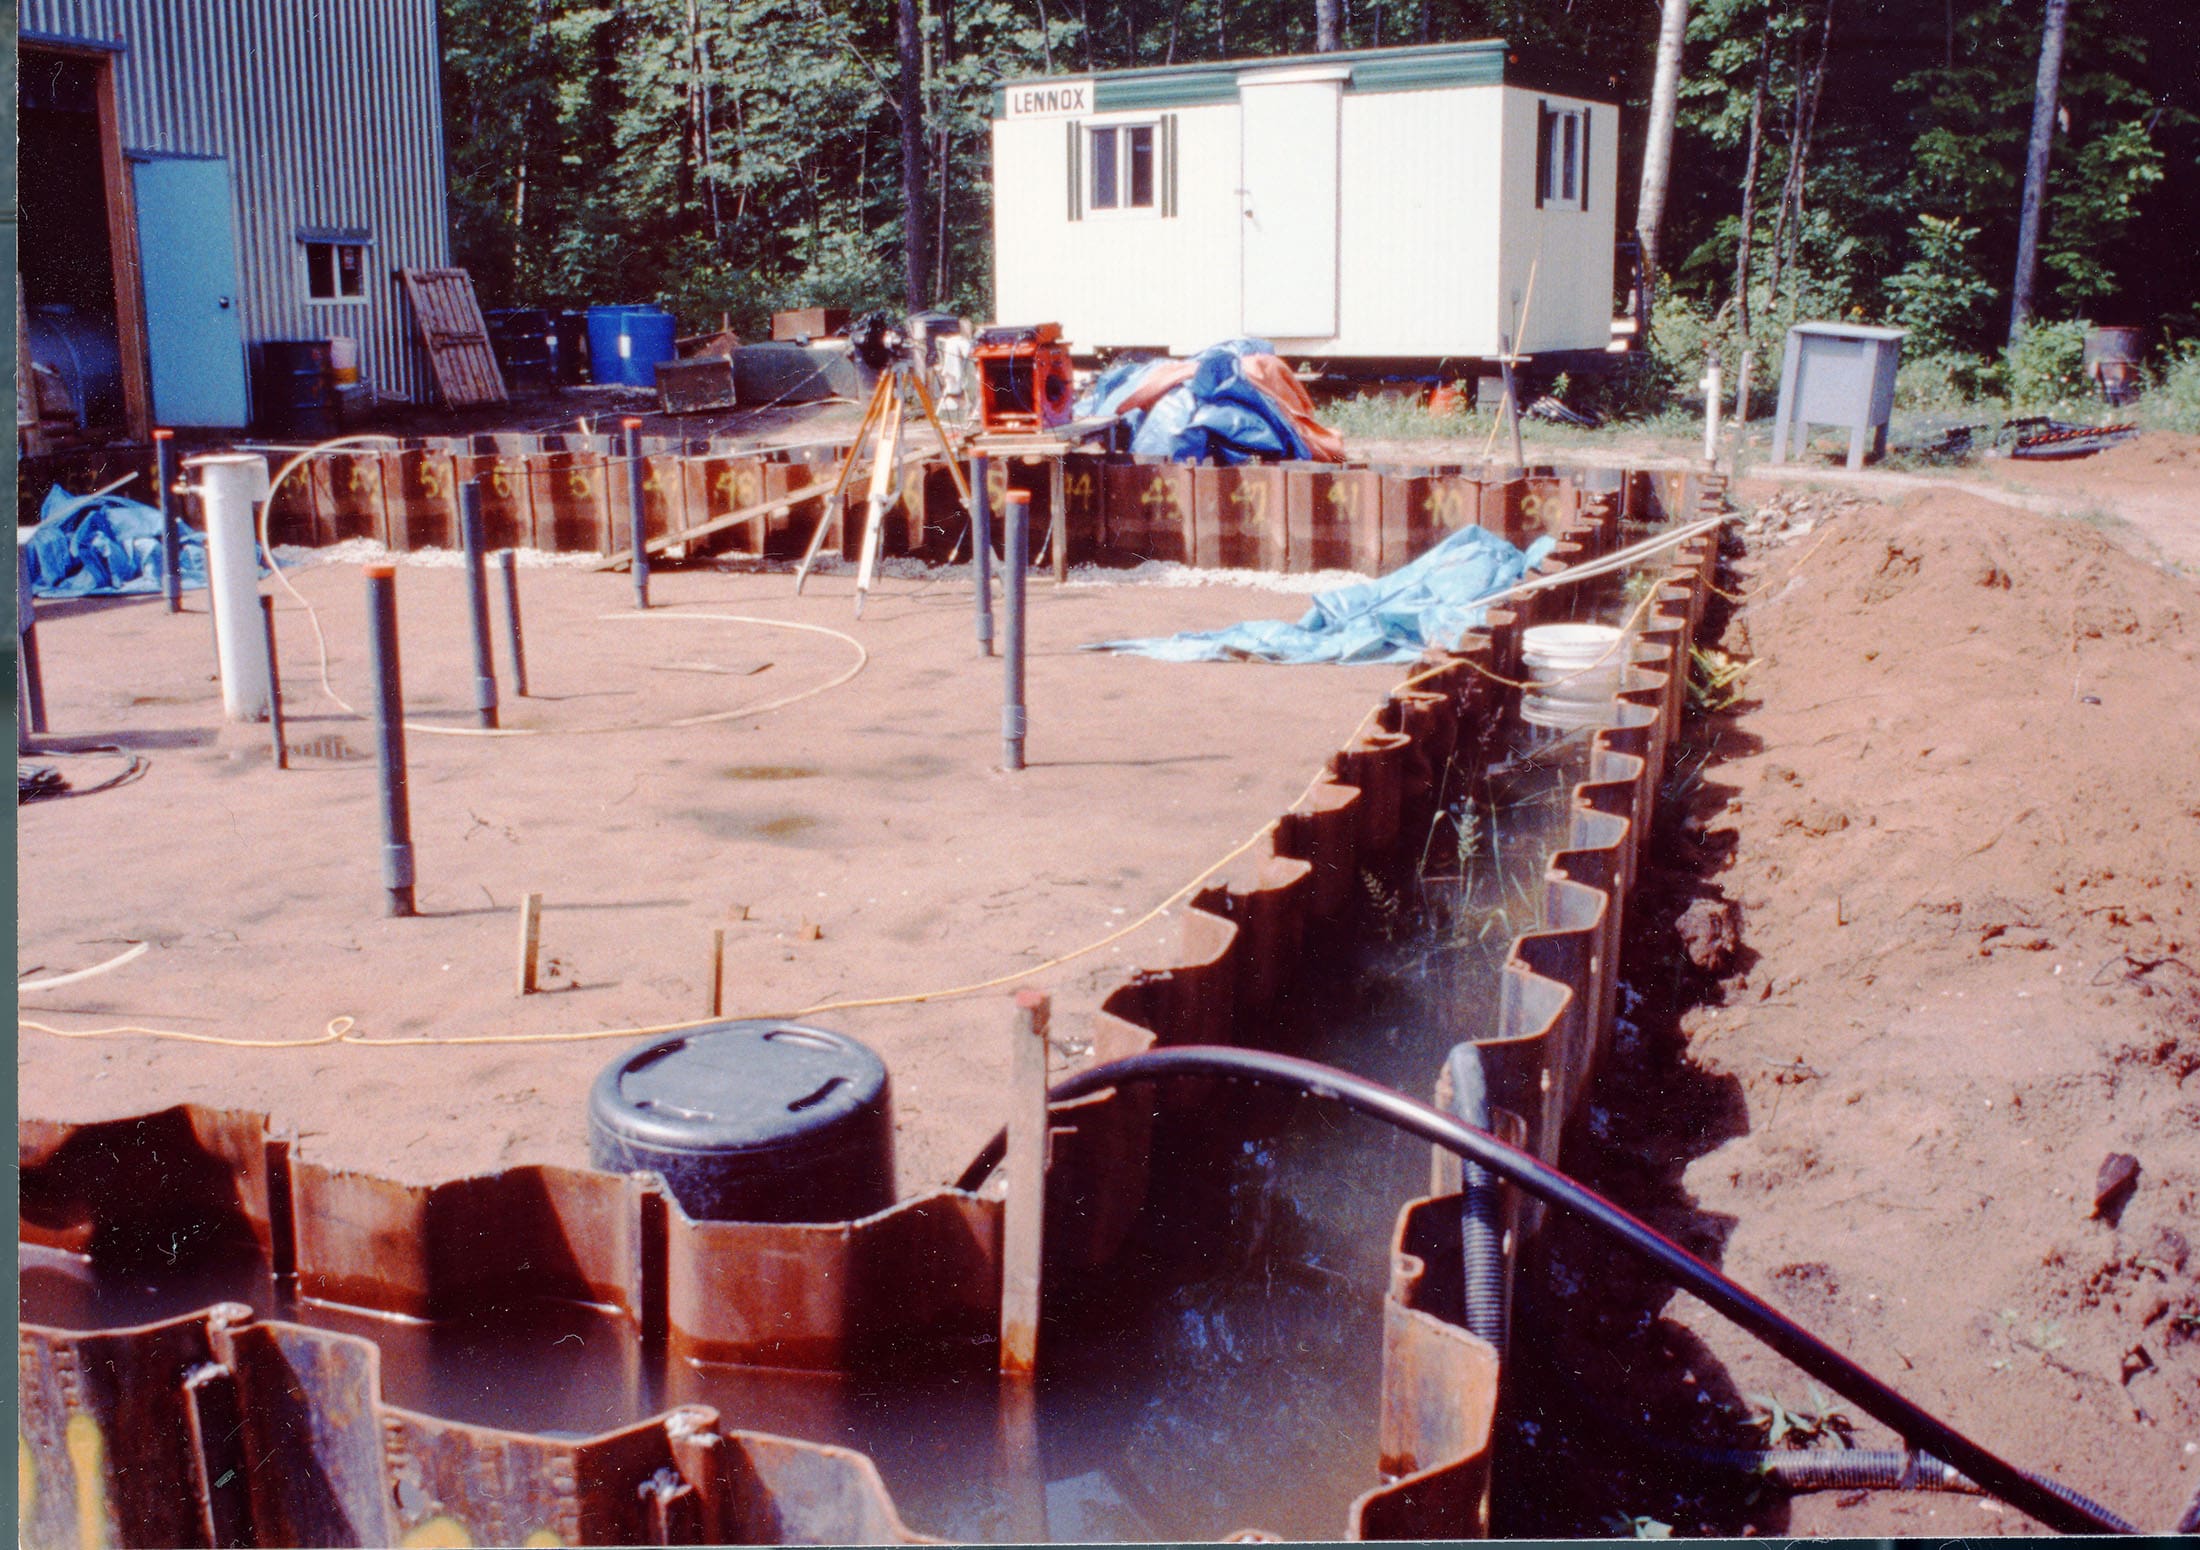 University of Waterloo Test Cell at CFB Borden